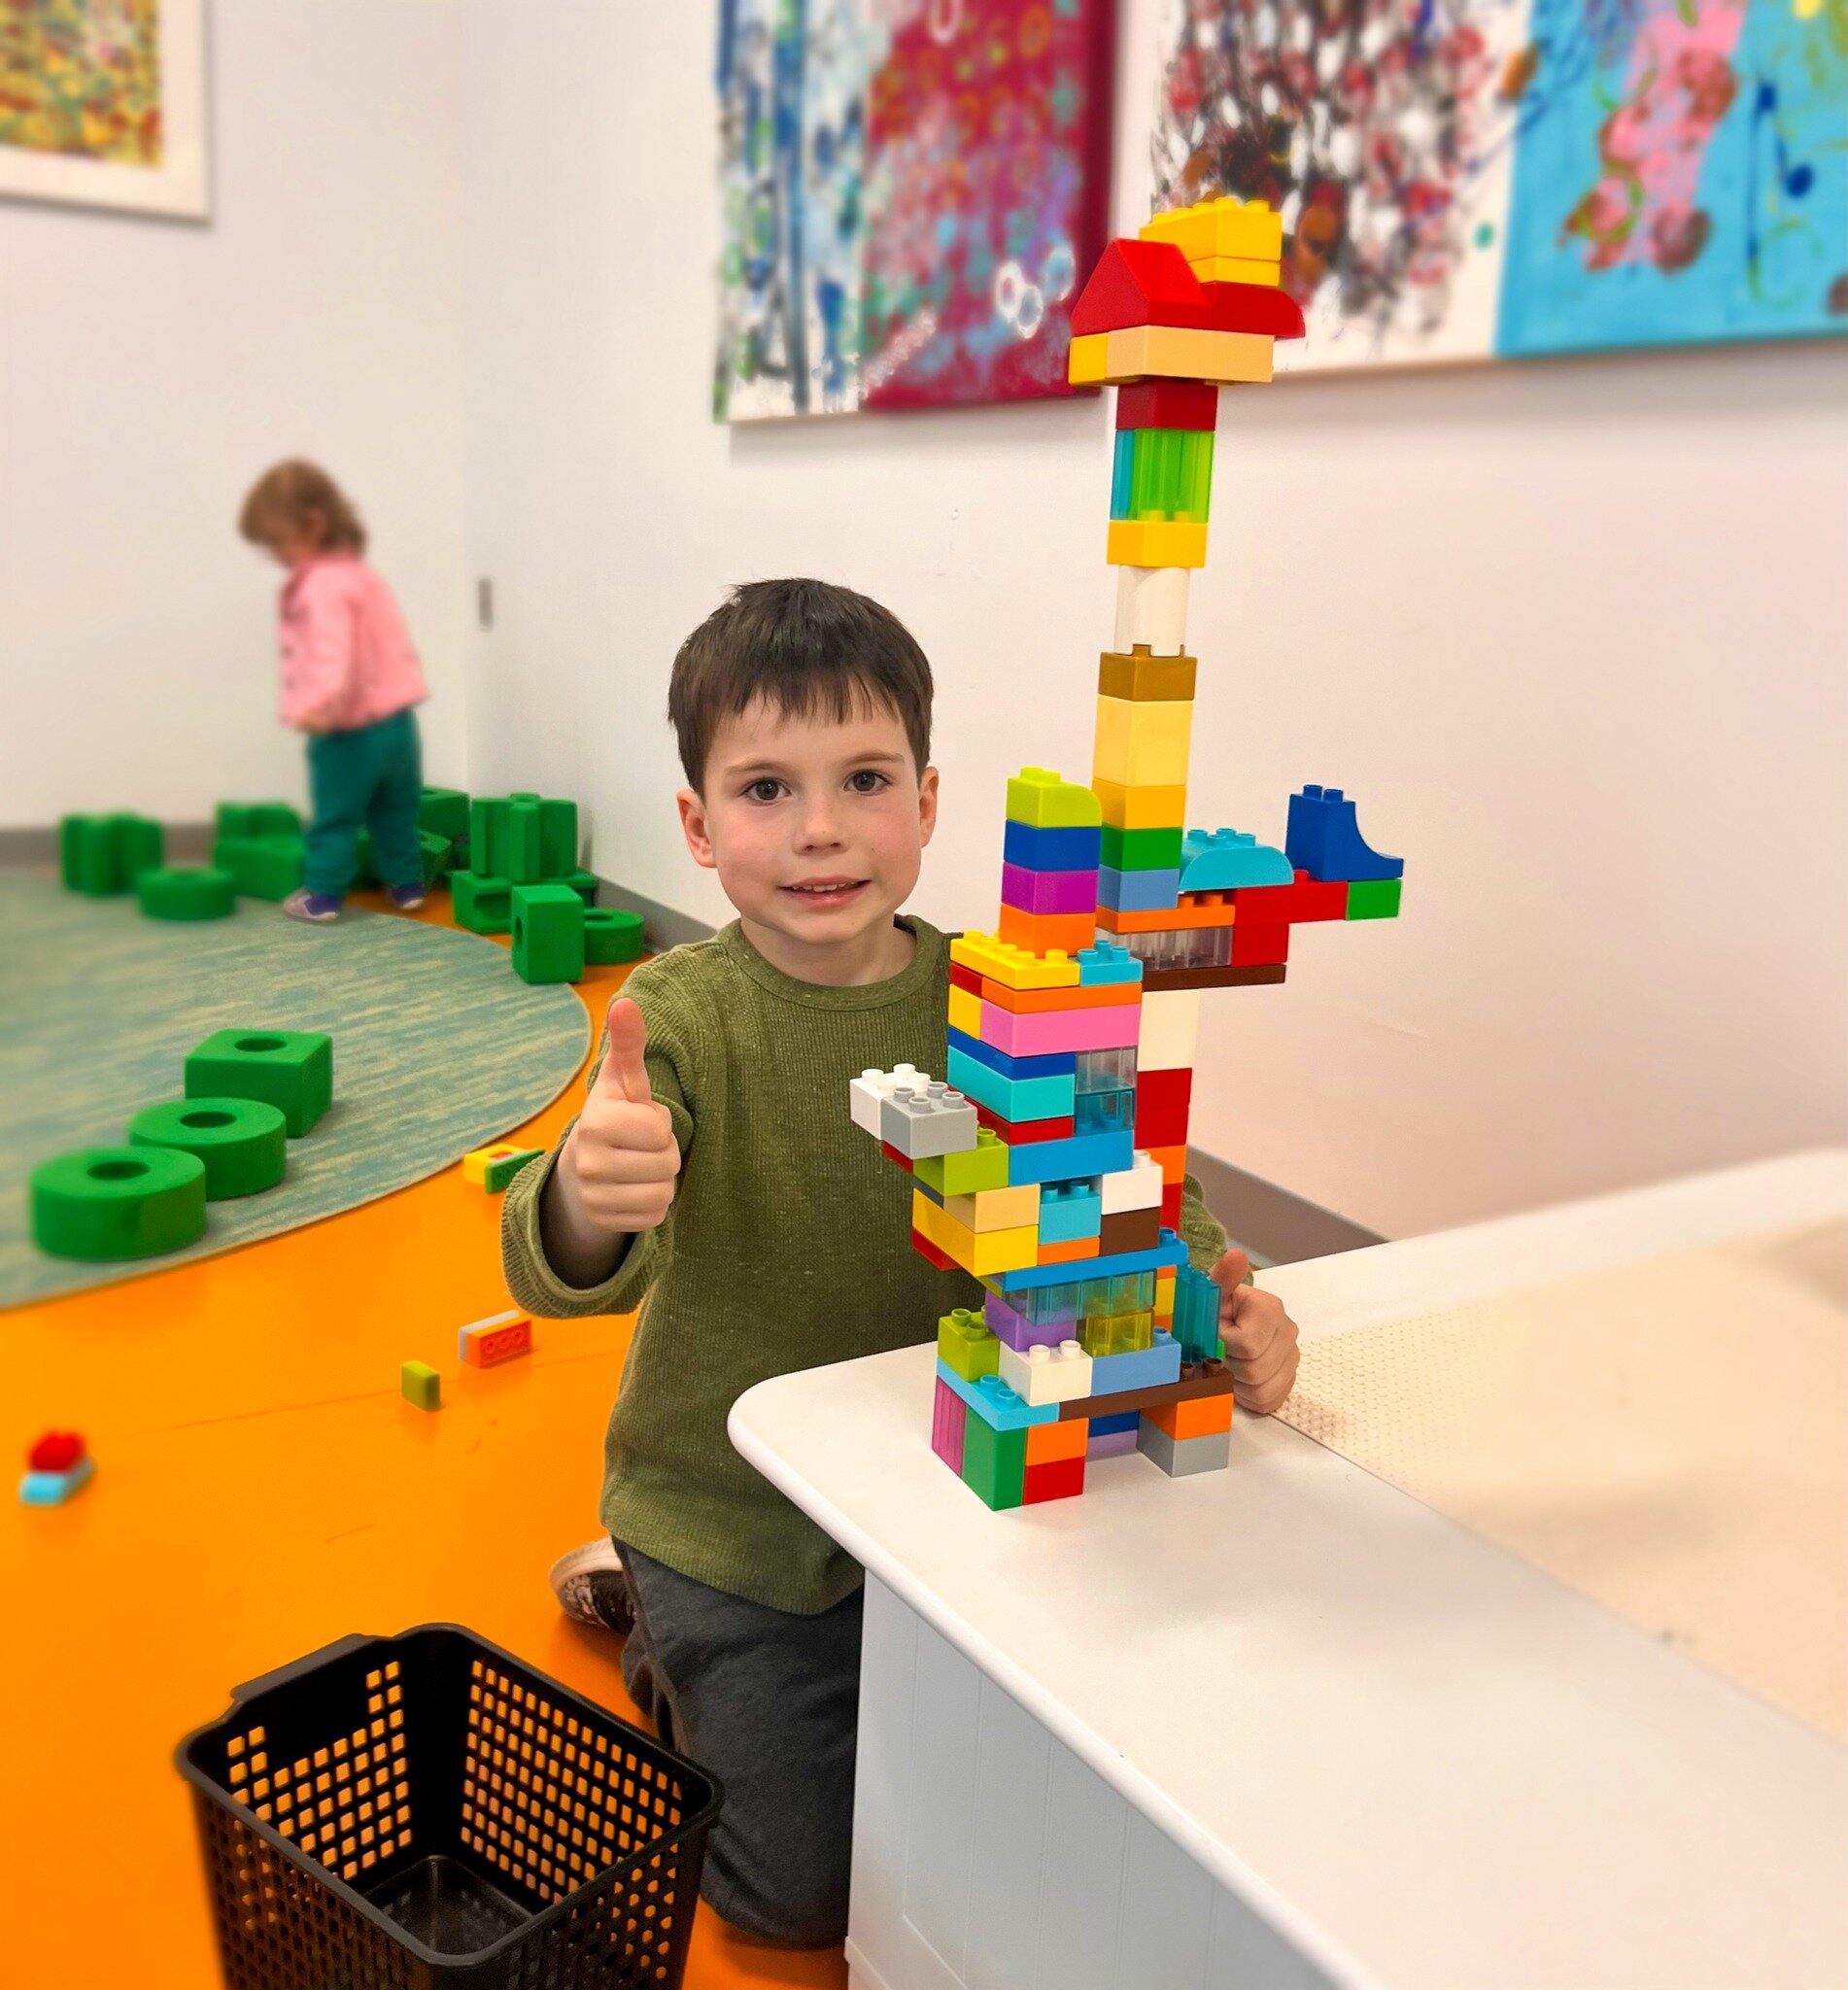 SO many fun and simple activities in the LAVAN FAMILY ART GALLERY!! From legos to foam blocks, imagination is the beginning of creation!!
✨
Click our link in bio for more info on memberships!
✨
#discoverwcm 
#WestchesterChildrensMuseum 
#WestchesterF